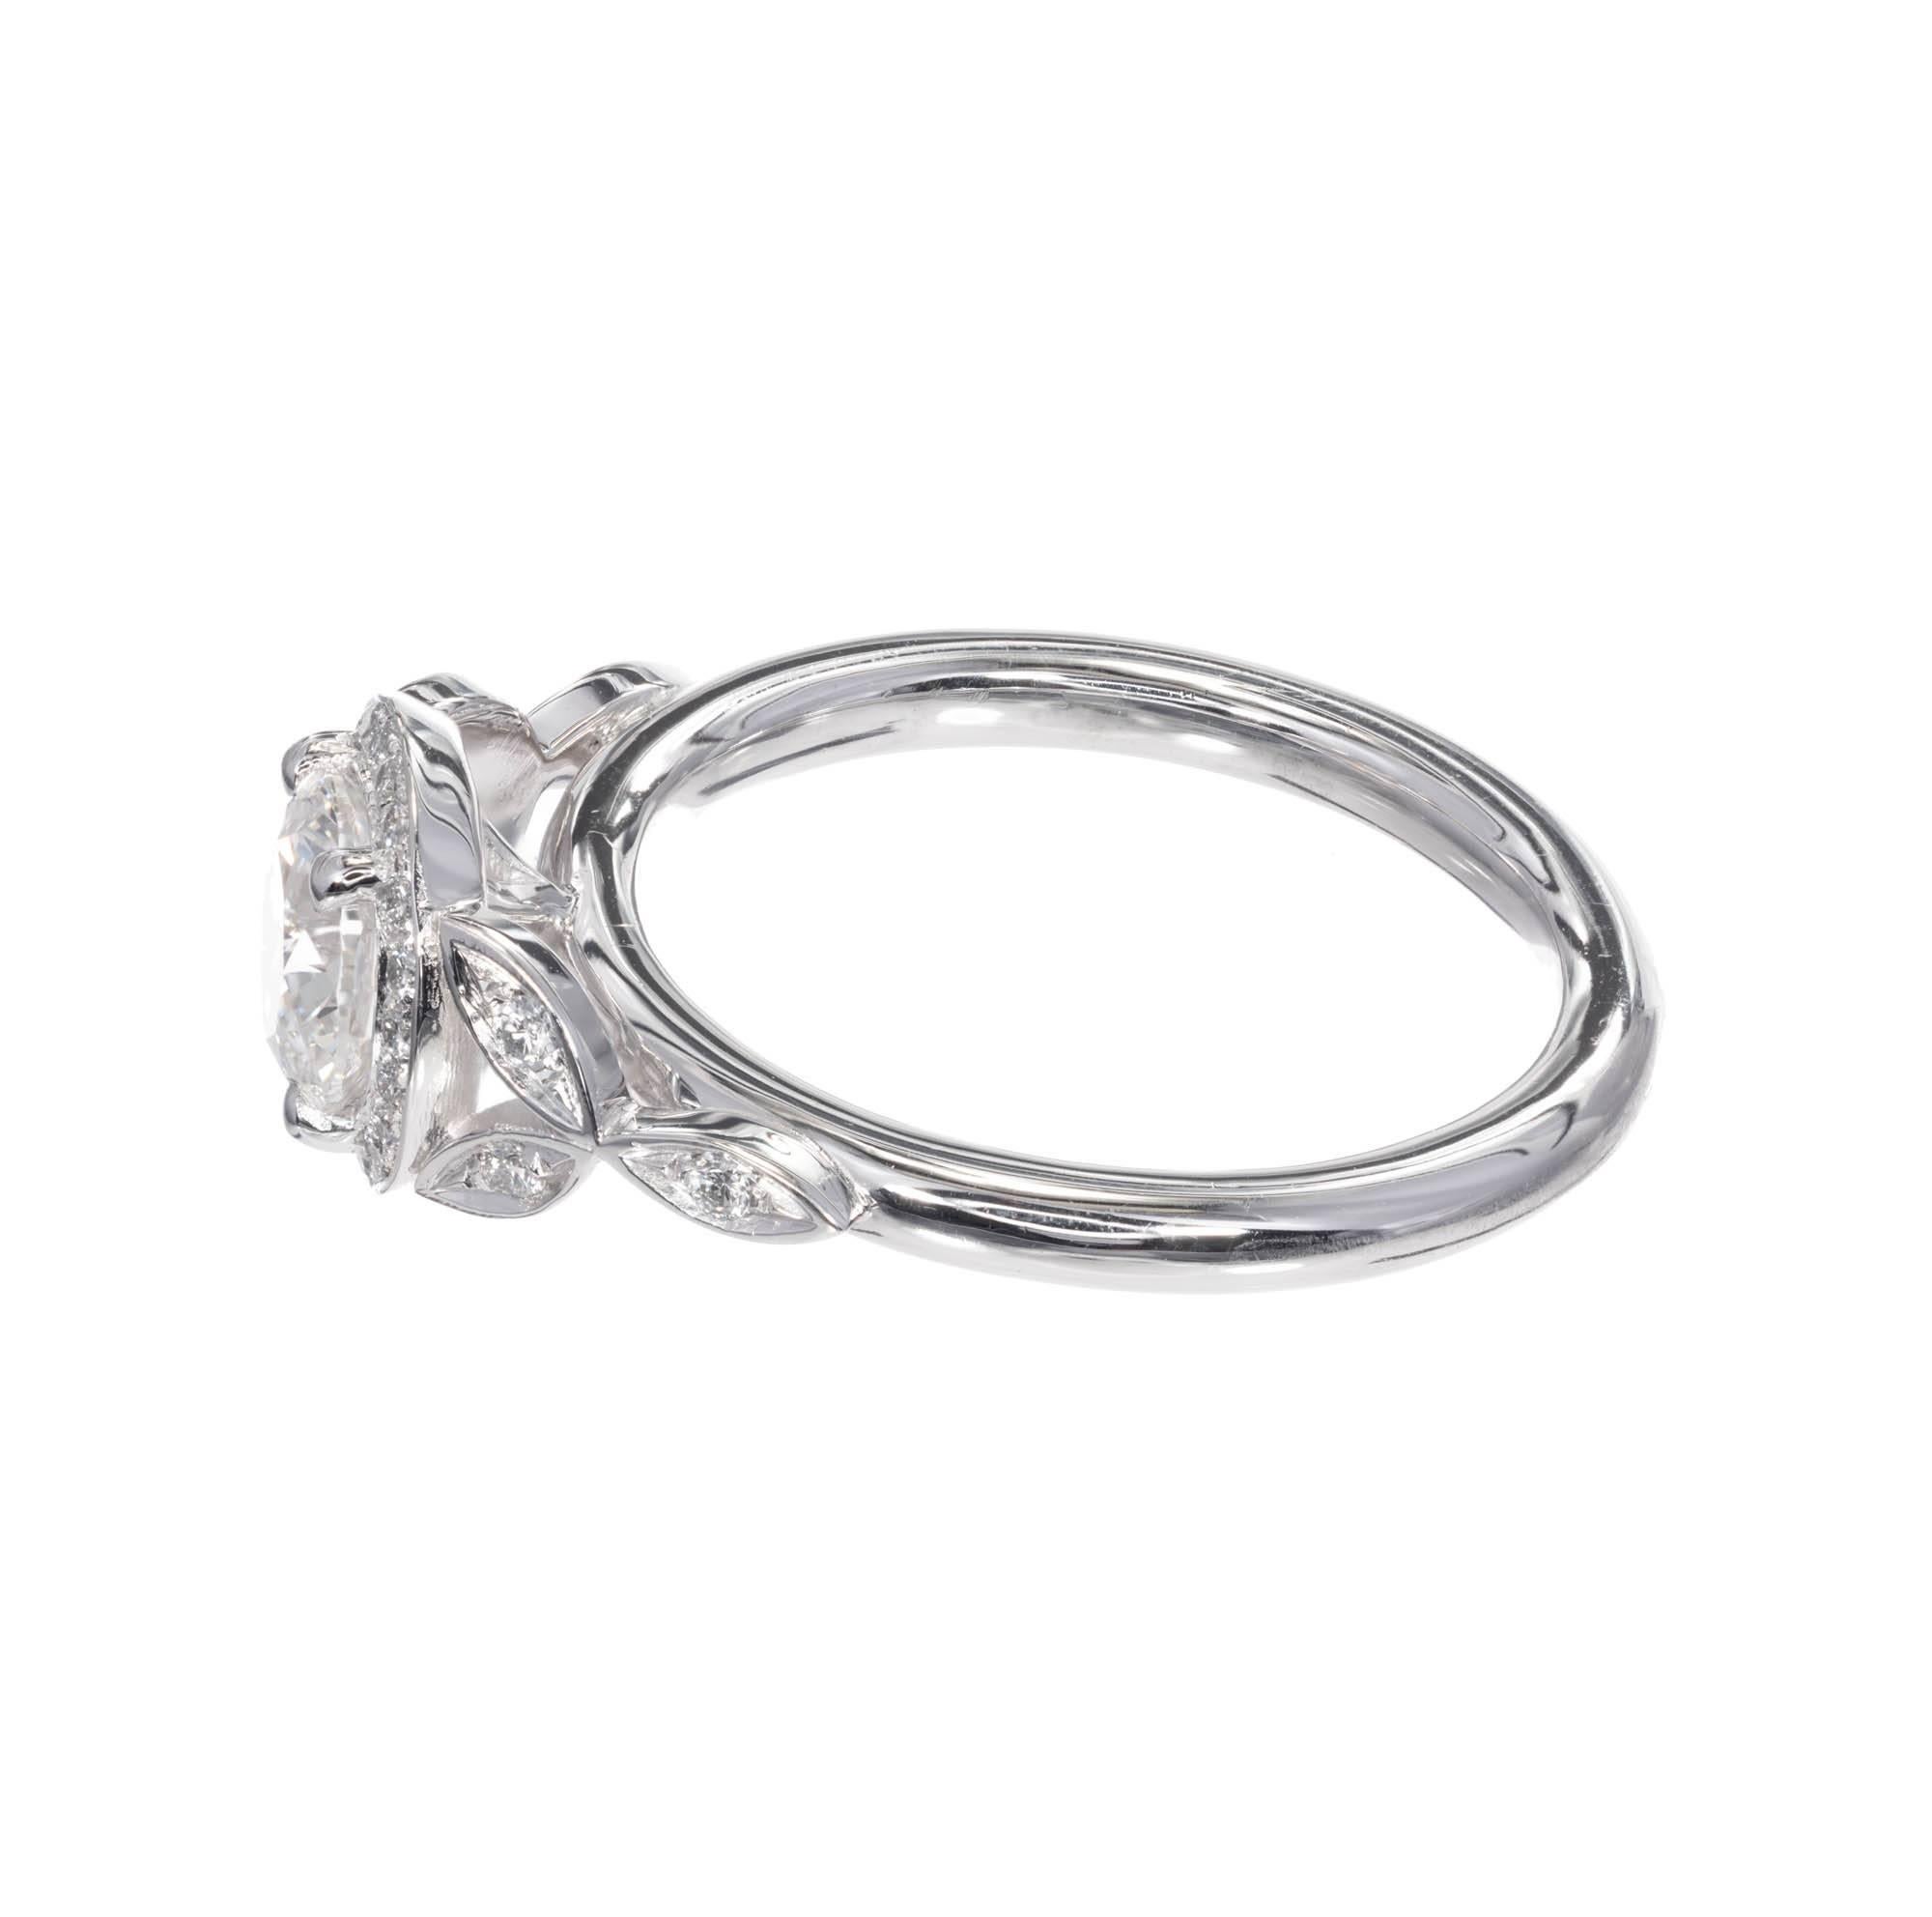 Peter Suchy 1.01 Carat Round Diamond Halo Engagement Platinum Ring In Good Condition For Sale In Stamford, CT